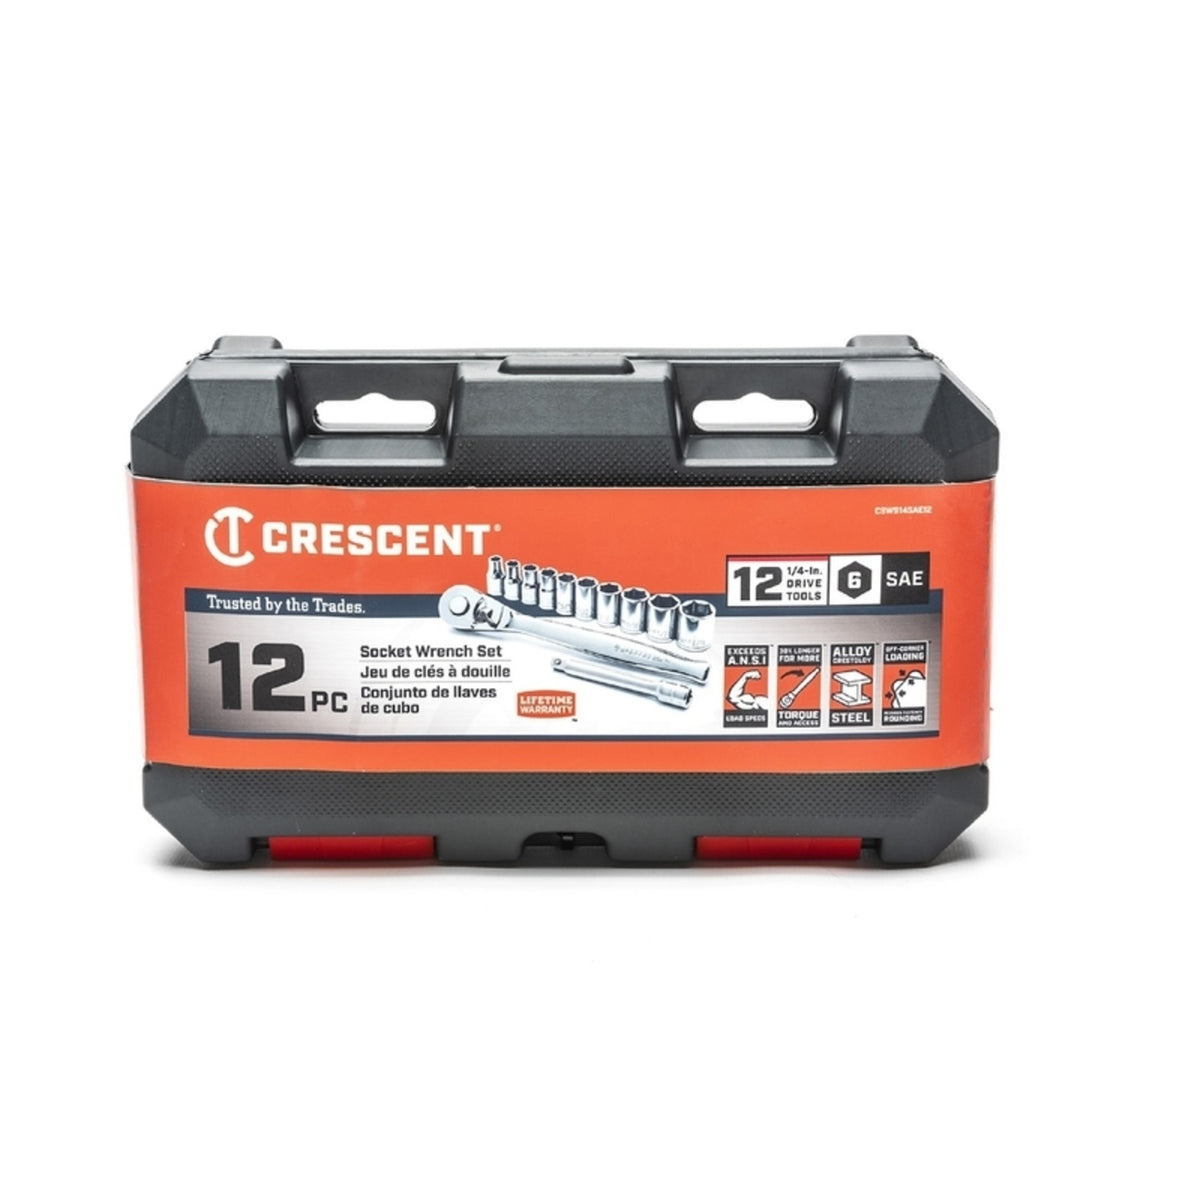 Crescent CSWS14MM12 Socket Wrench Set, 6 Point, 1/4"